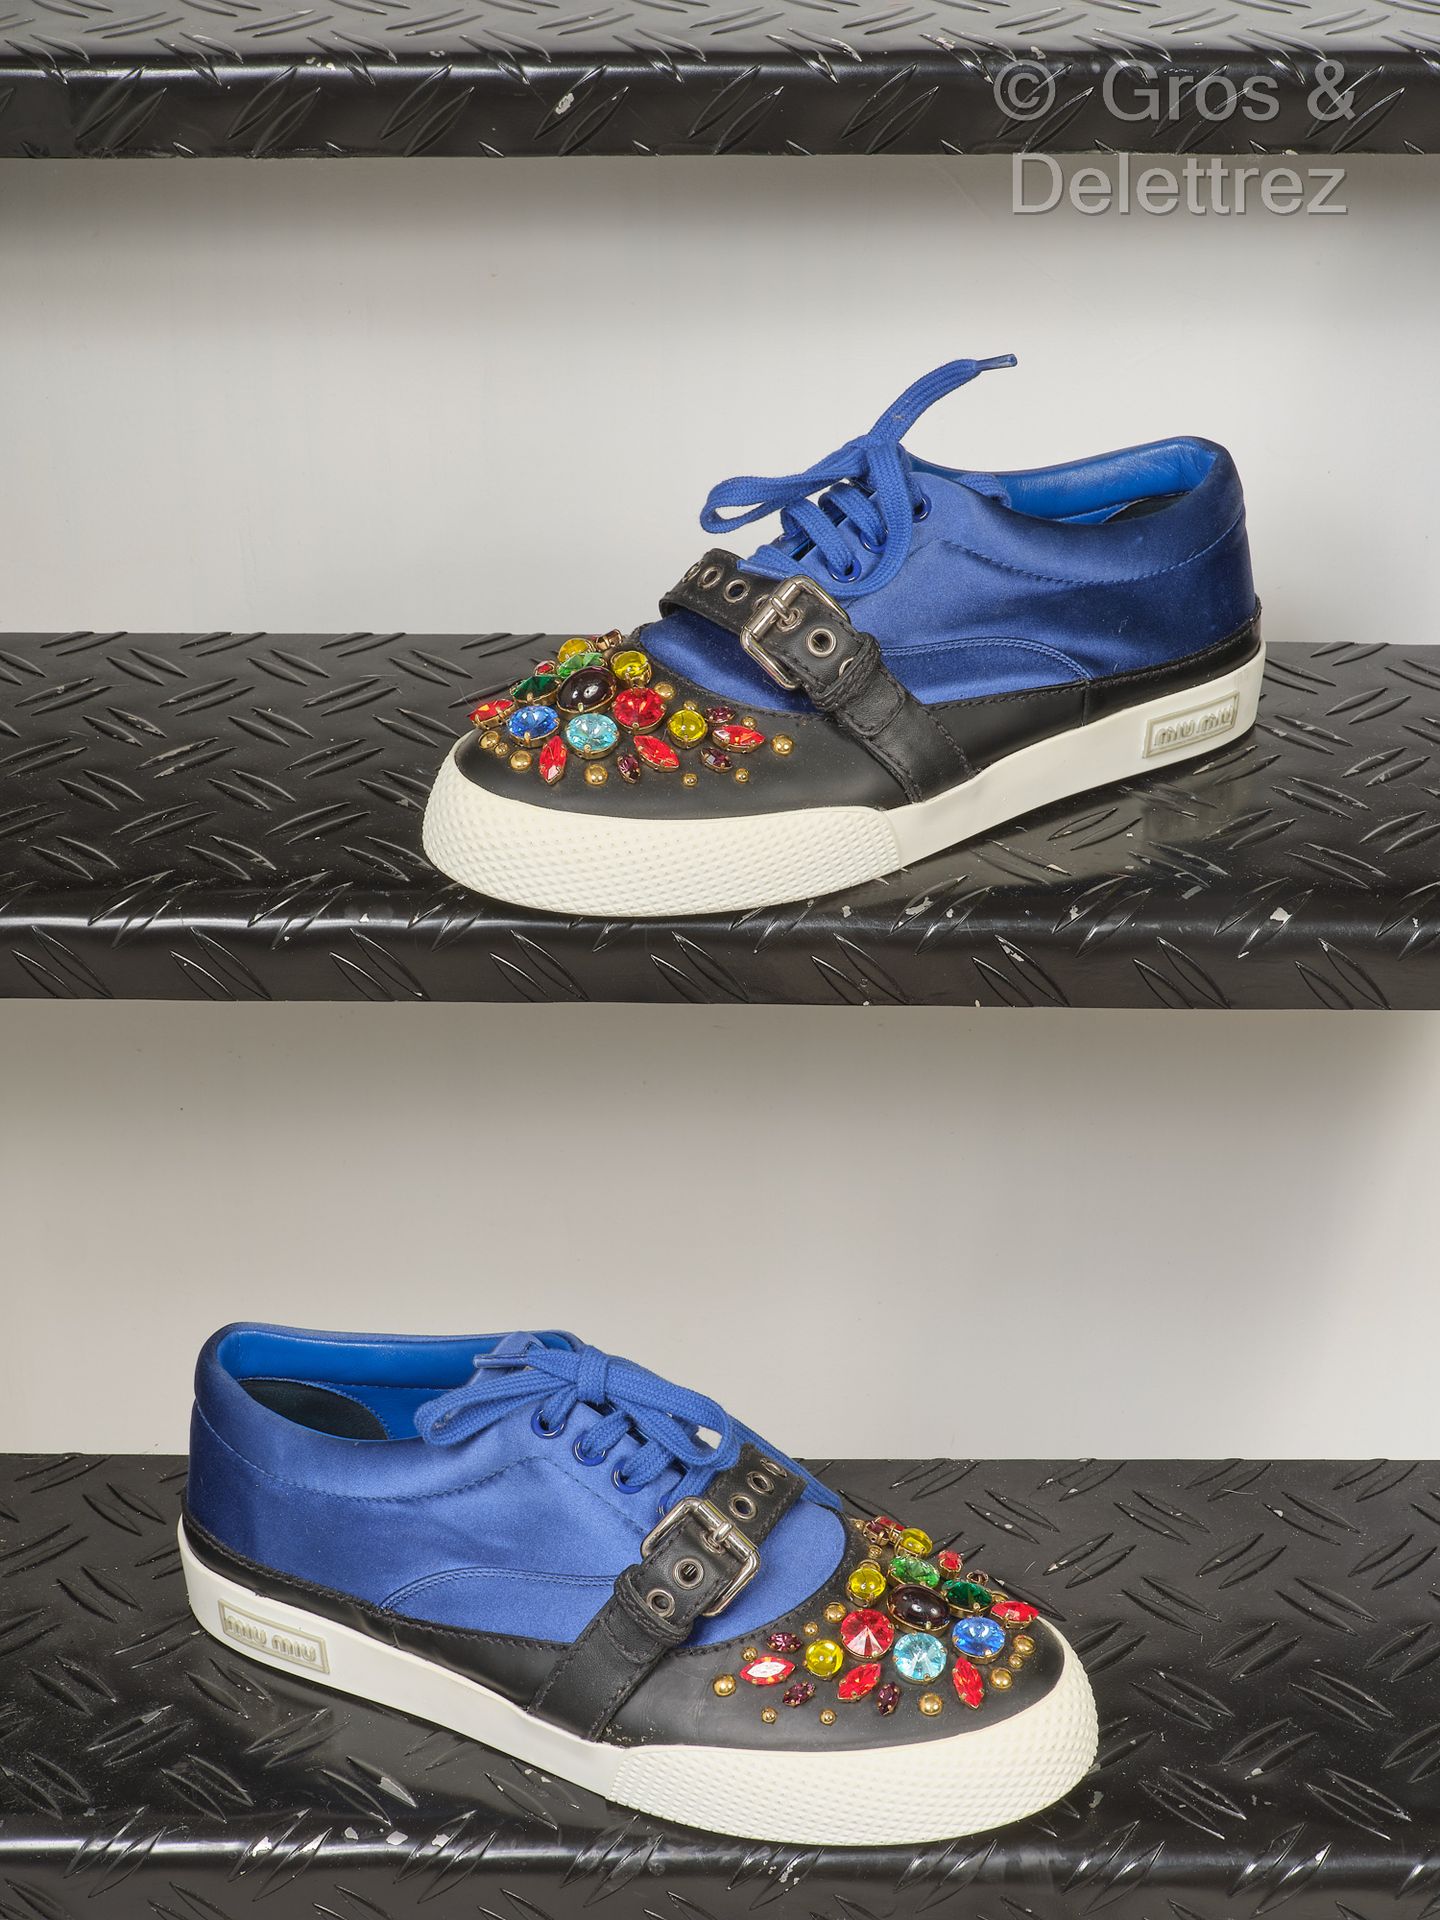 MIU MIU Pair of laced sneakers in royal blue satin and black gum leather decorat&hellip;